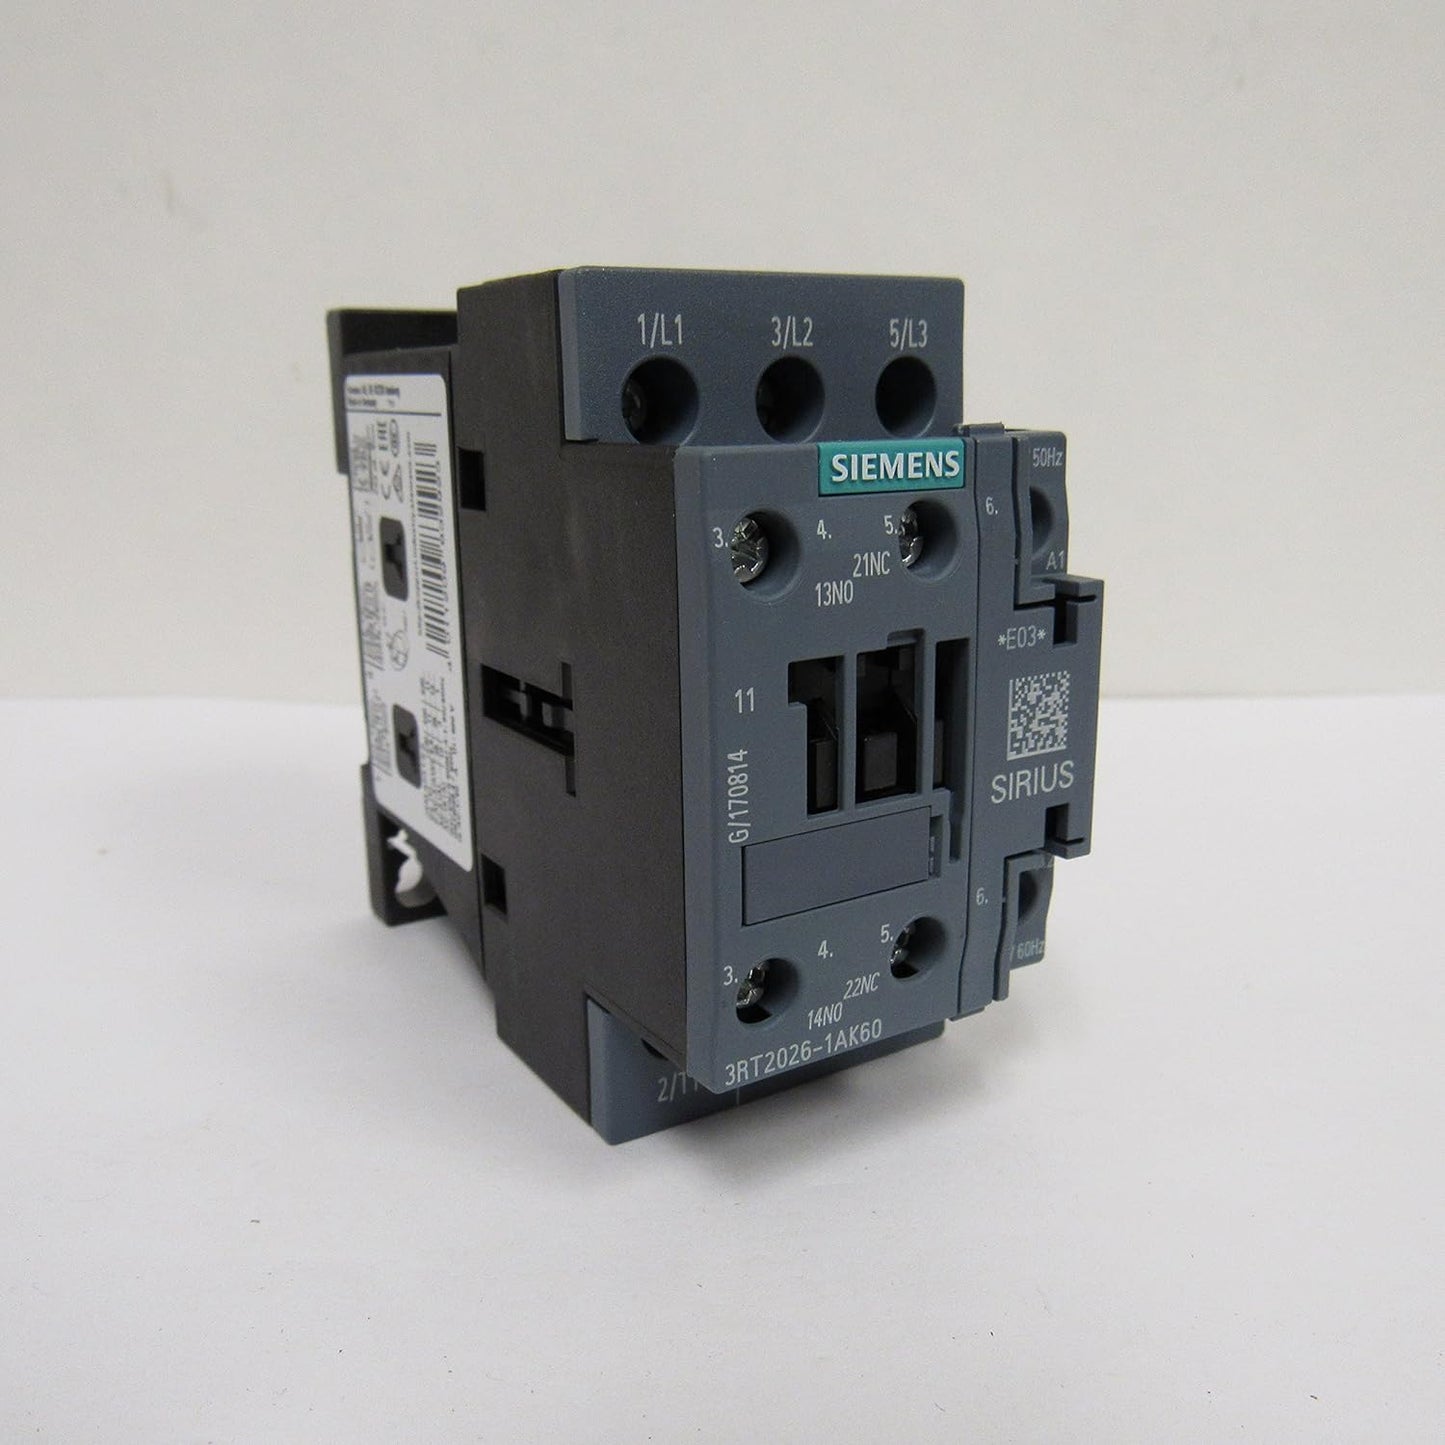 Siemens 3RT2026-1AK60 3 Pole, 25 AMP contactor Rated 7.5 H.P @ 230v / 15 H.P. @ 460 Volt 3 Phase - 110/120vAC Coil and 1 N.O./1 N.C. Base Mounted Auxiliary Contacts